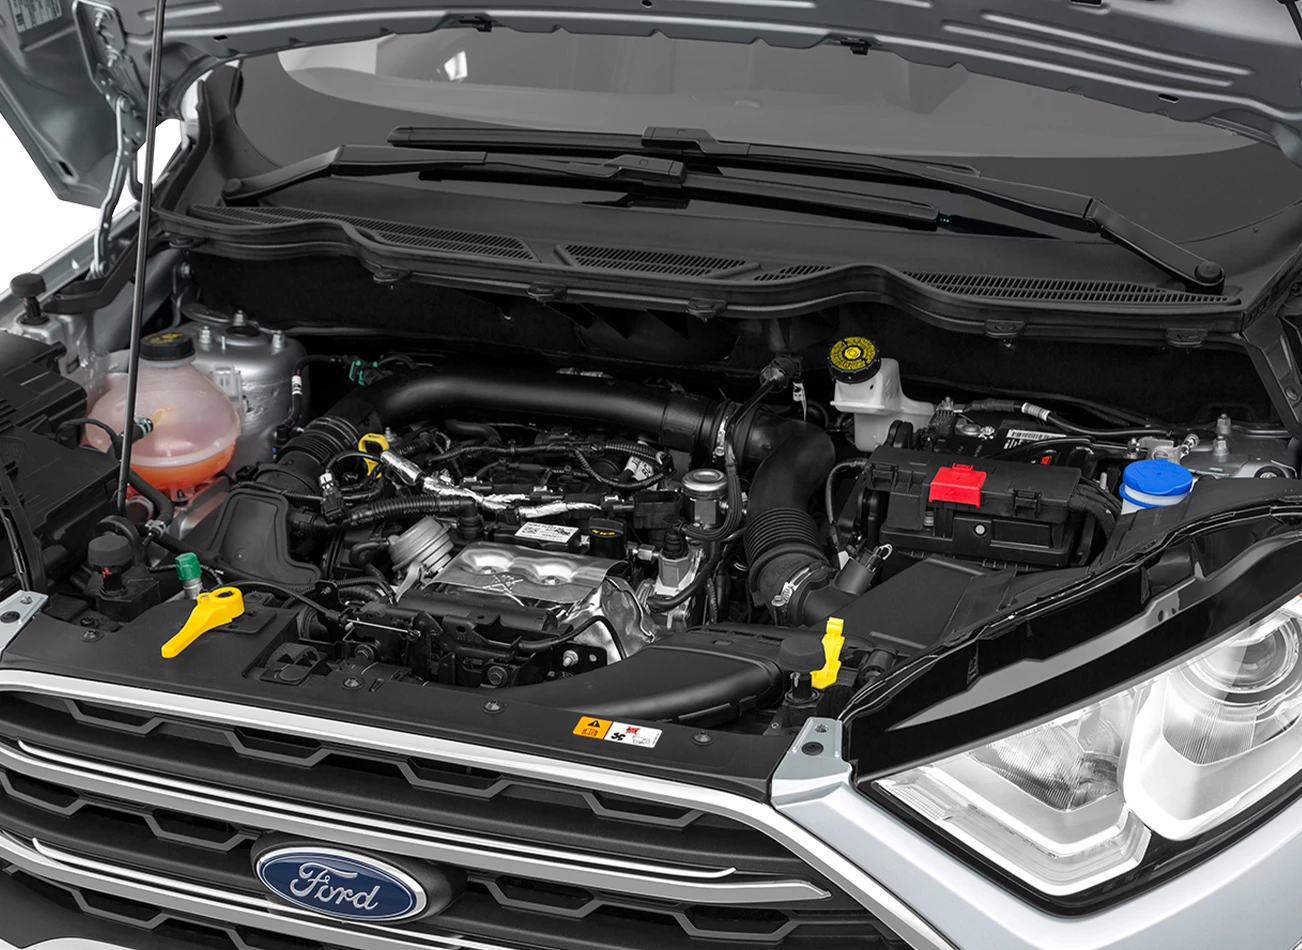 2020 Ford Ecosport Review: Engine | CarMax